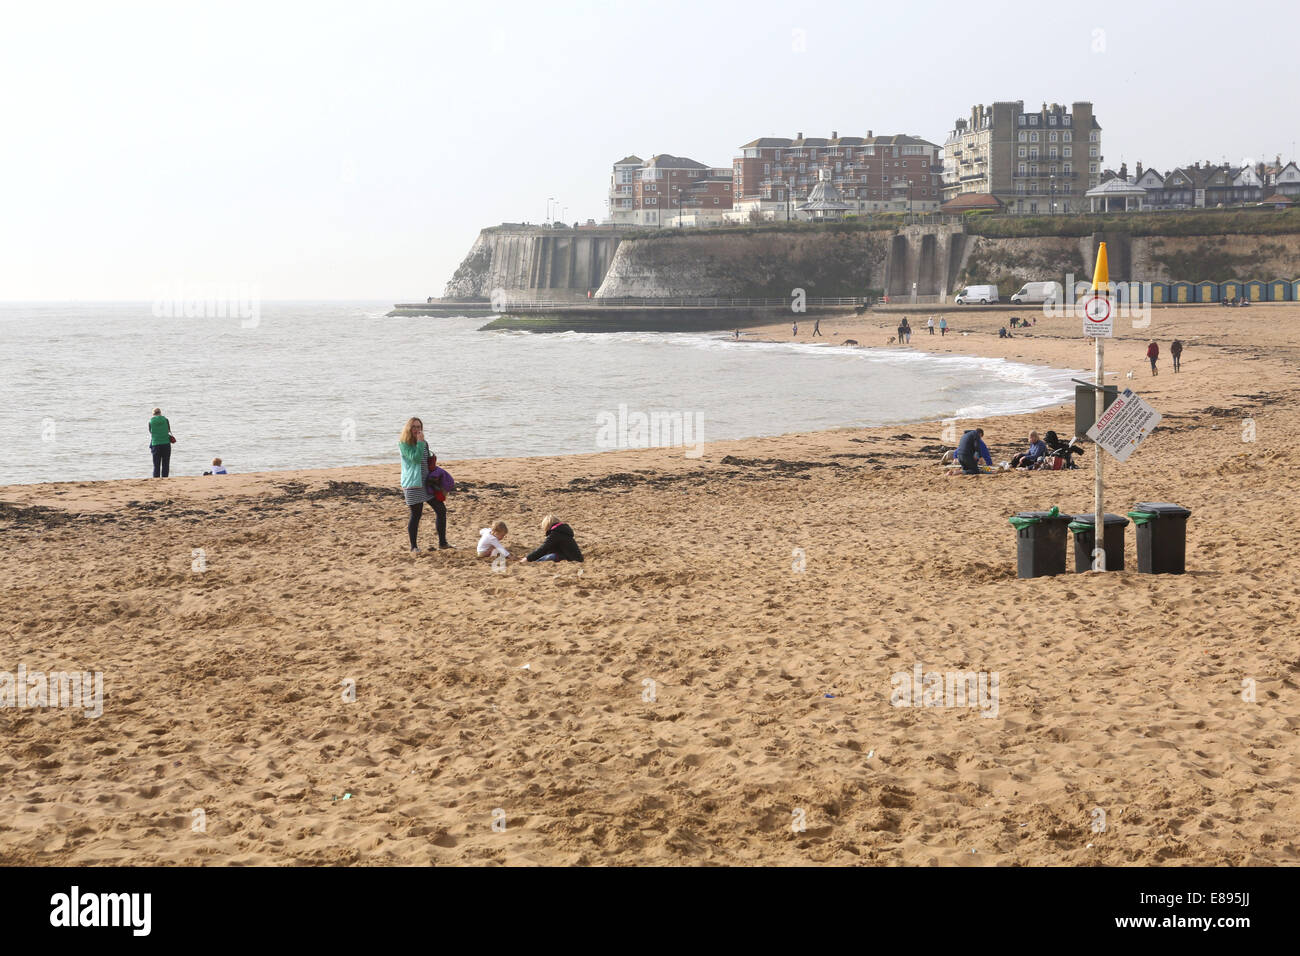 The UK enjoyed warm spring weather as temperatures reached up to 20 degrees in South East England, making it hotter than some parts of Europe.  Where: Broadstairs, Kent, United Kingdom When: 30 Mar 2014 Stock Photo